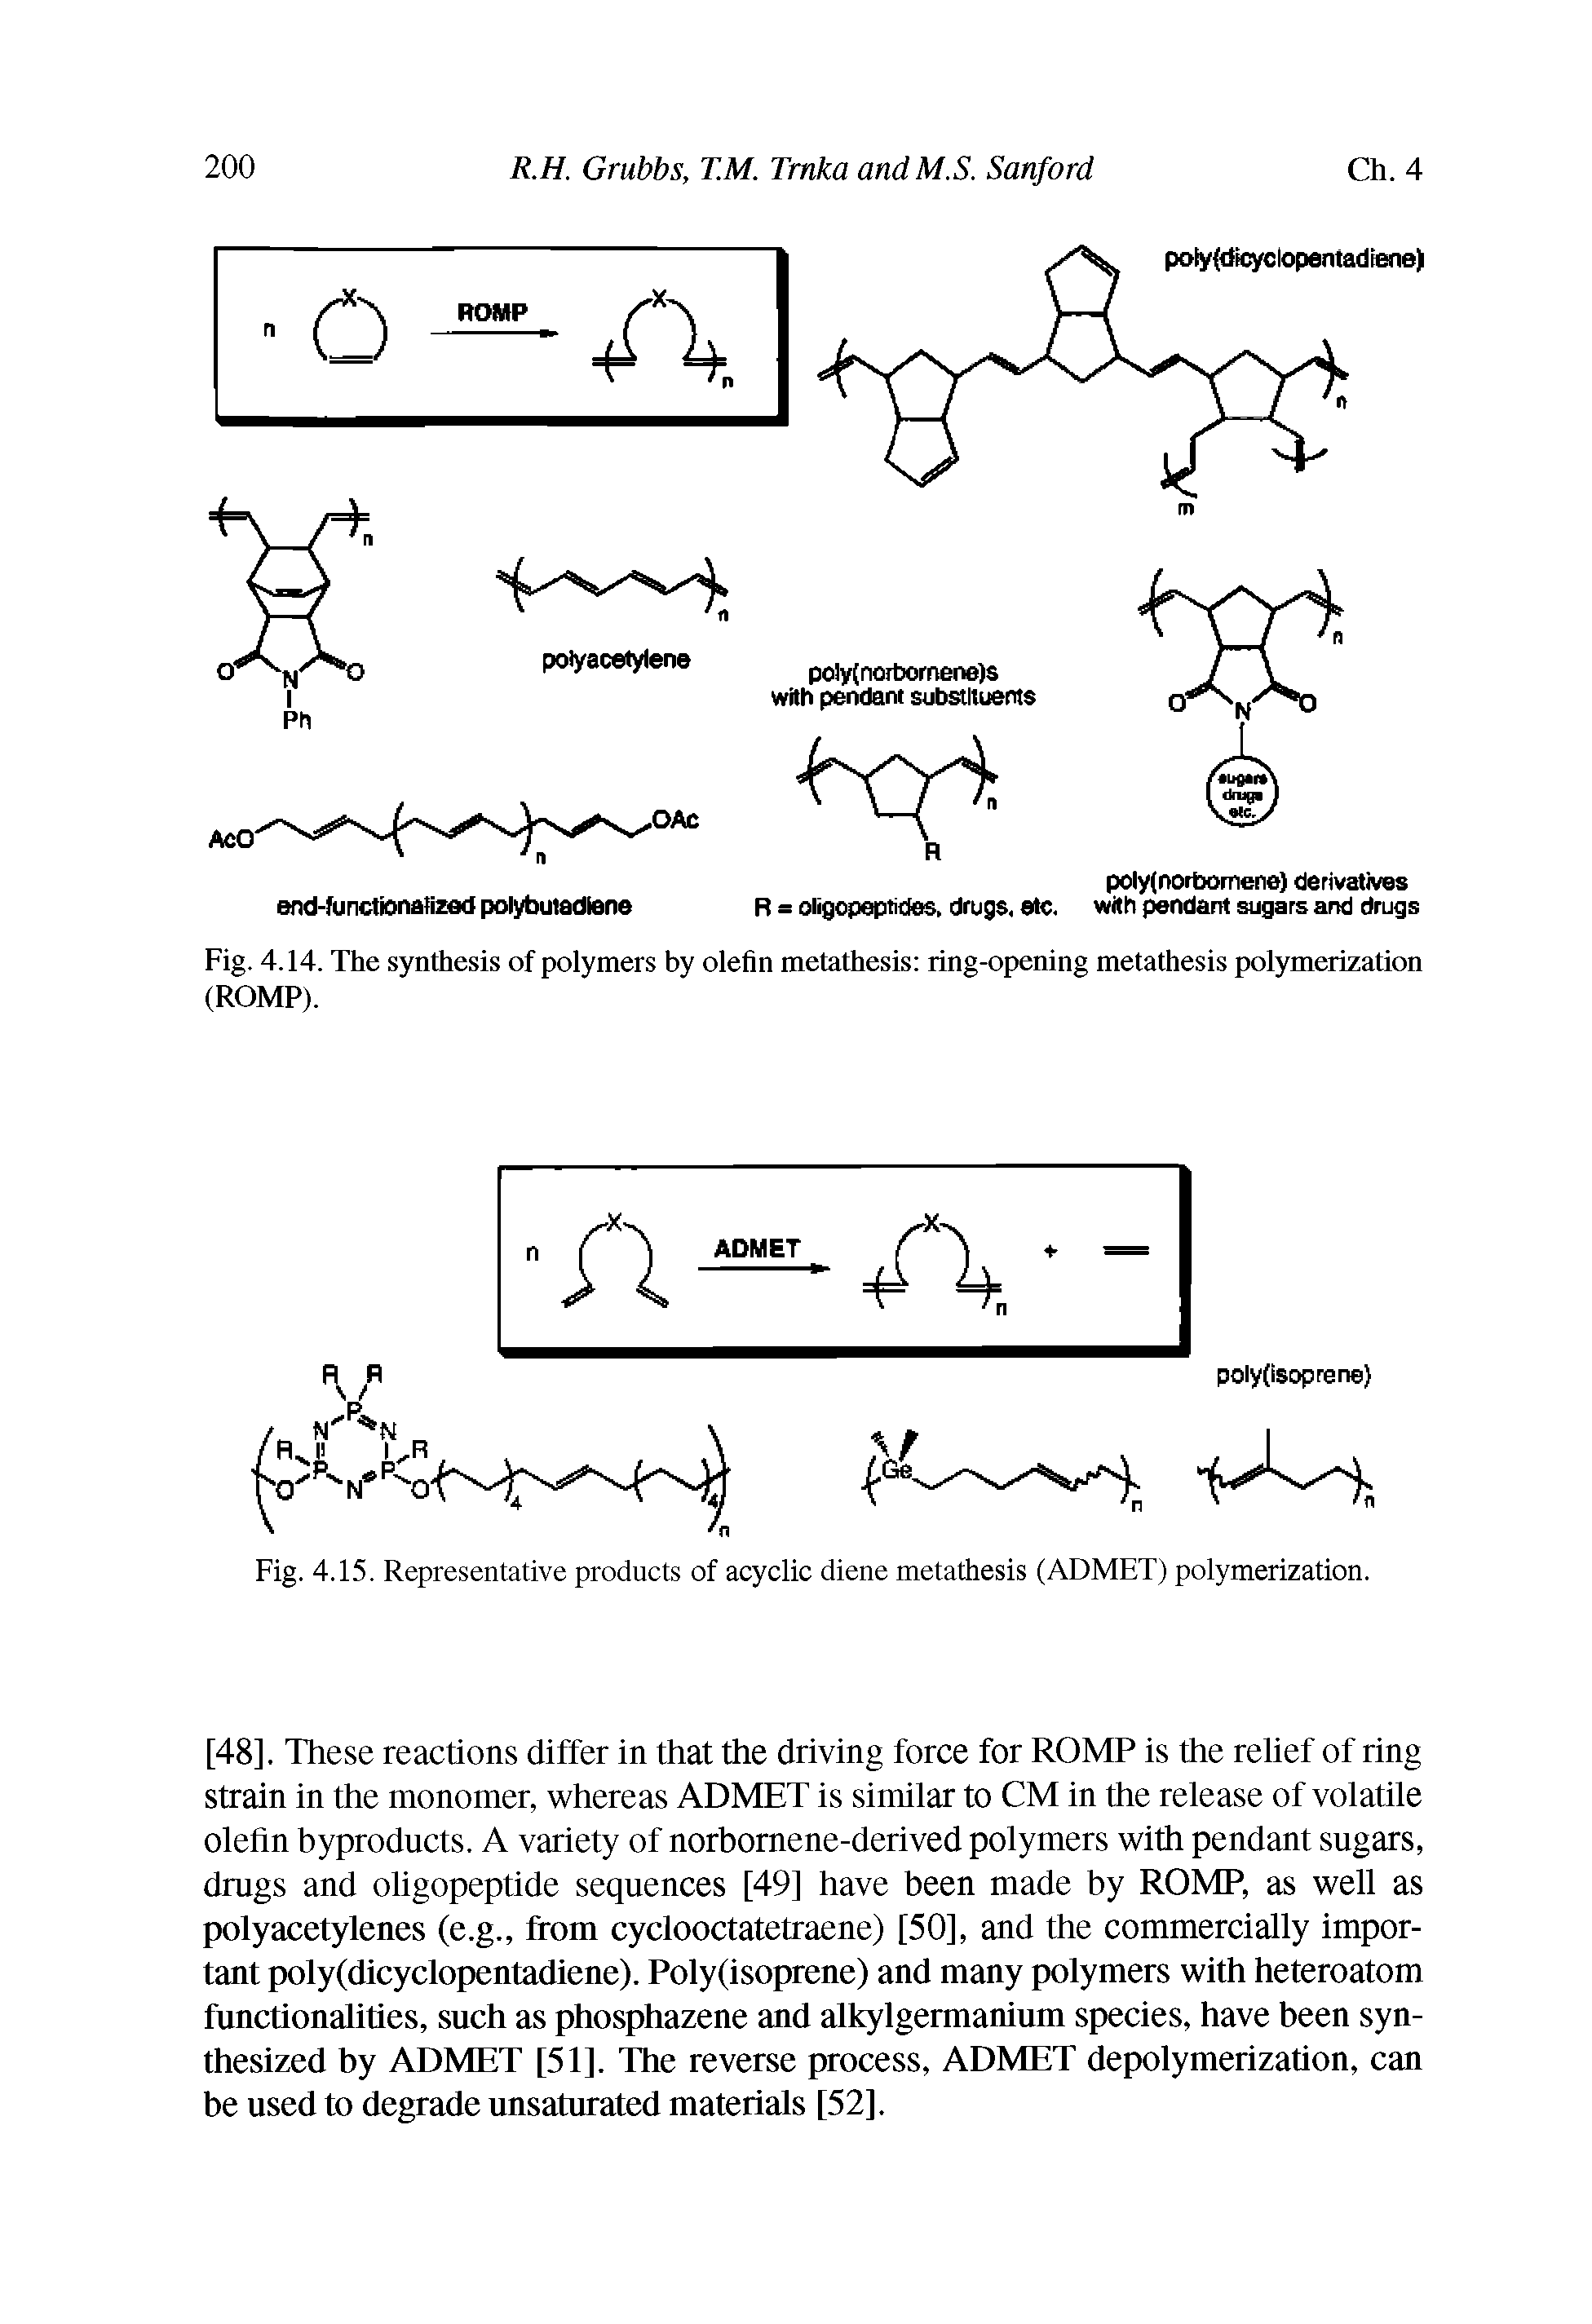 Fig. 4.14. The synthesis of polymers by olefin metathesis ring-opening metathesis polymerization (ROMP).